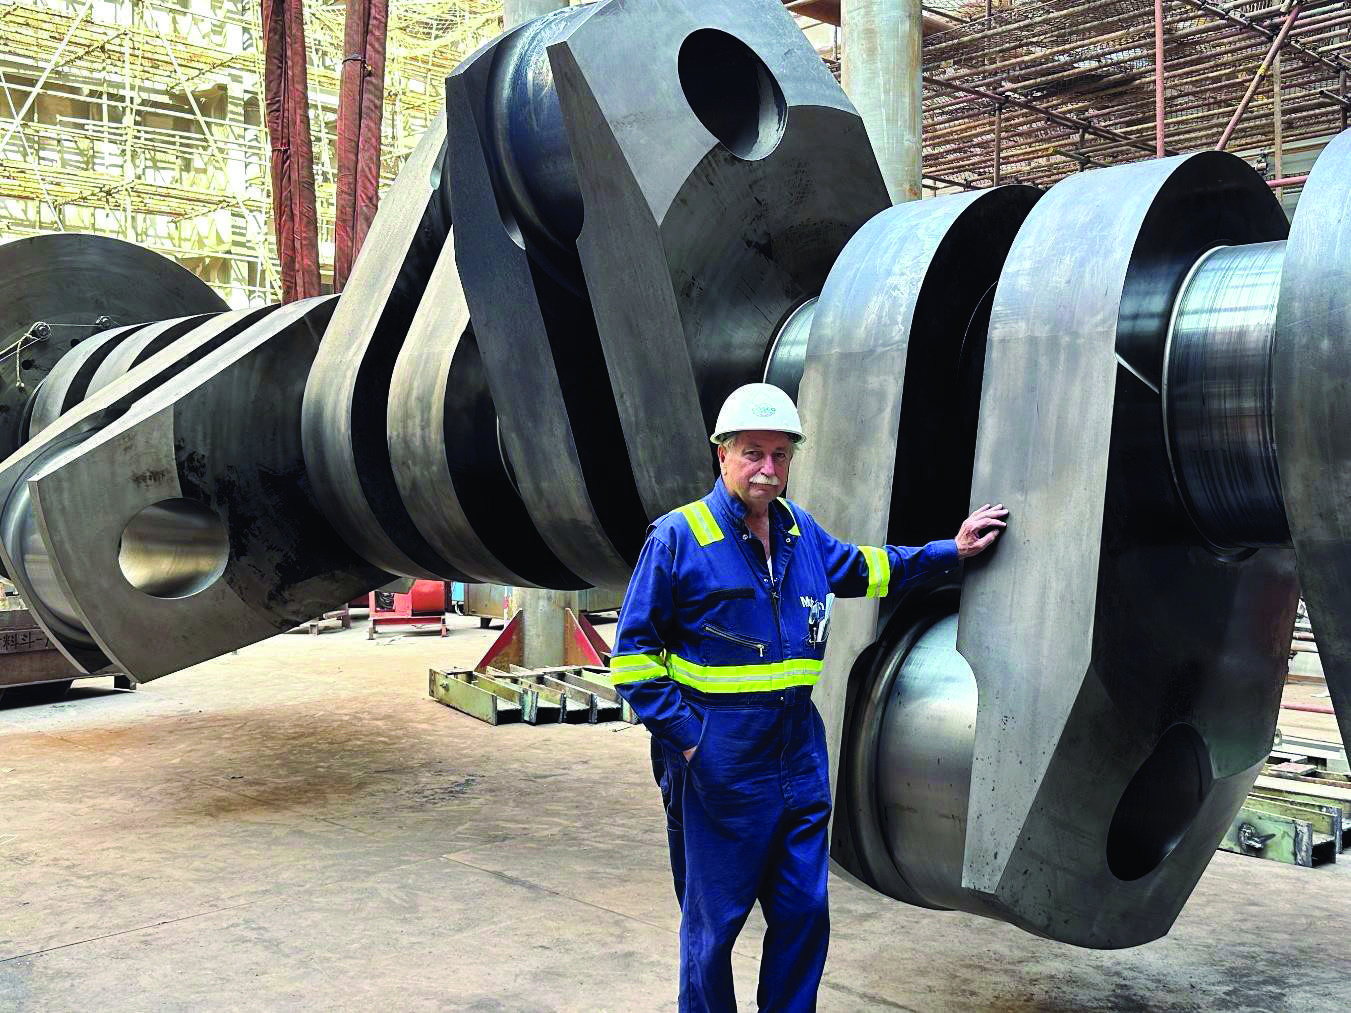 Angus Lundstrum, wearing a white hardhat and blue jumpsuit with yellow safety stripes, is dwarfed next to the Manukai's crankshaft.